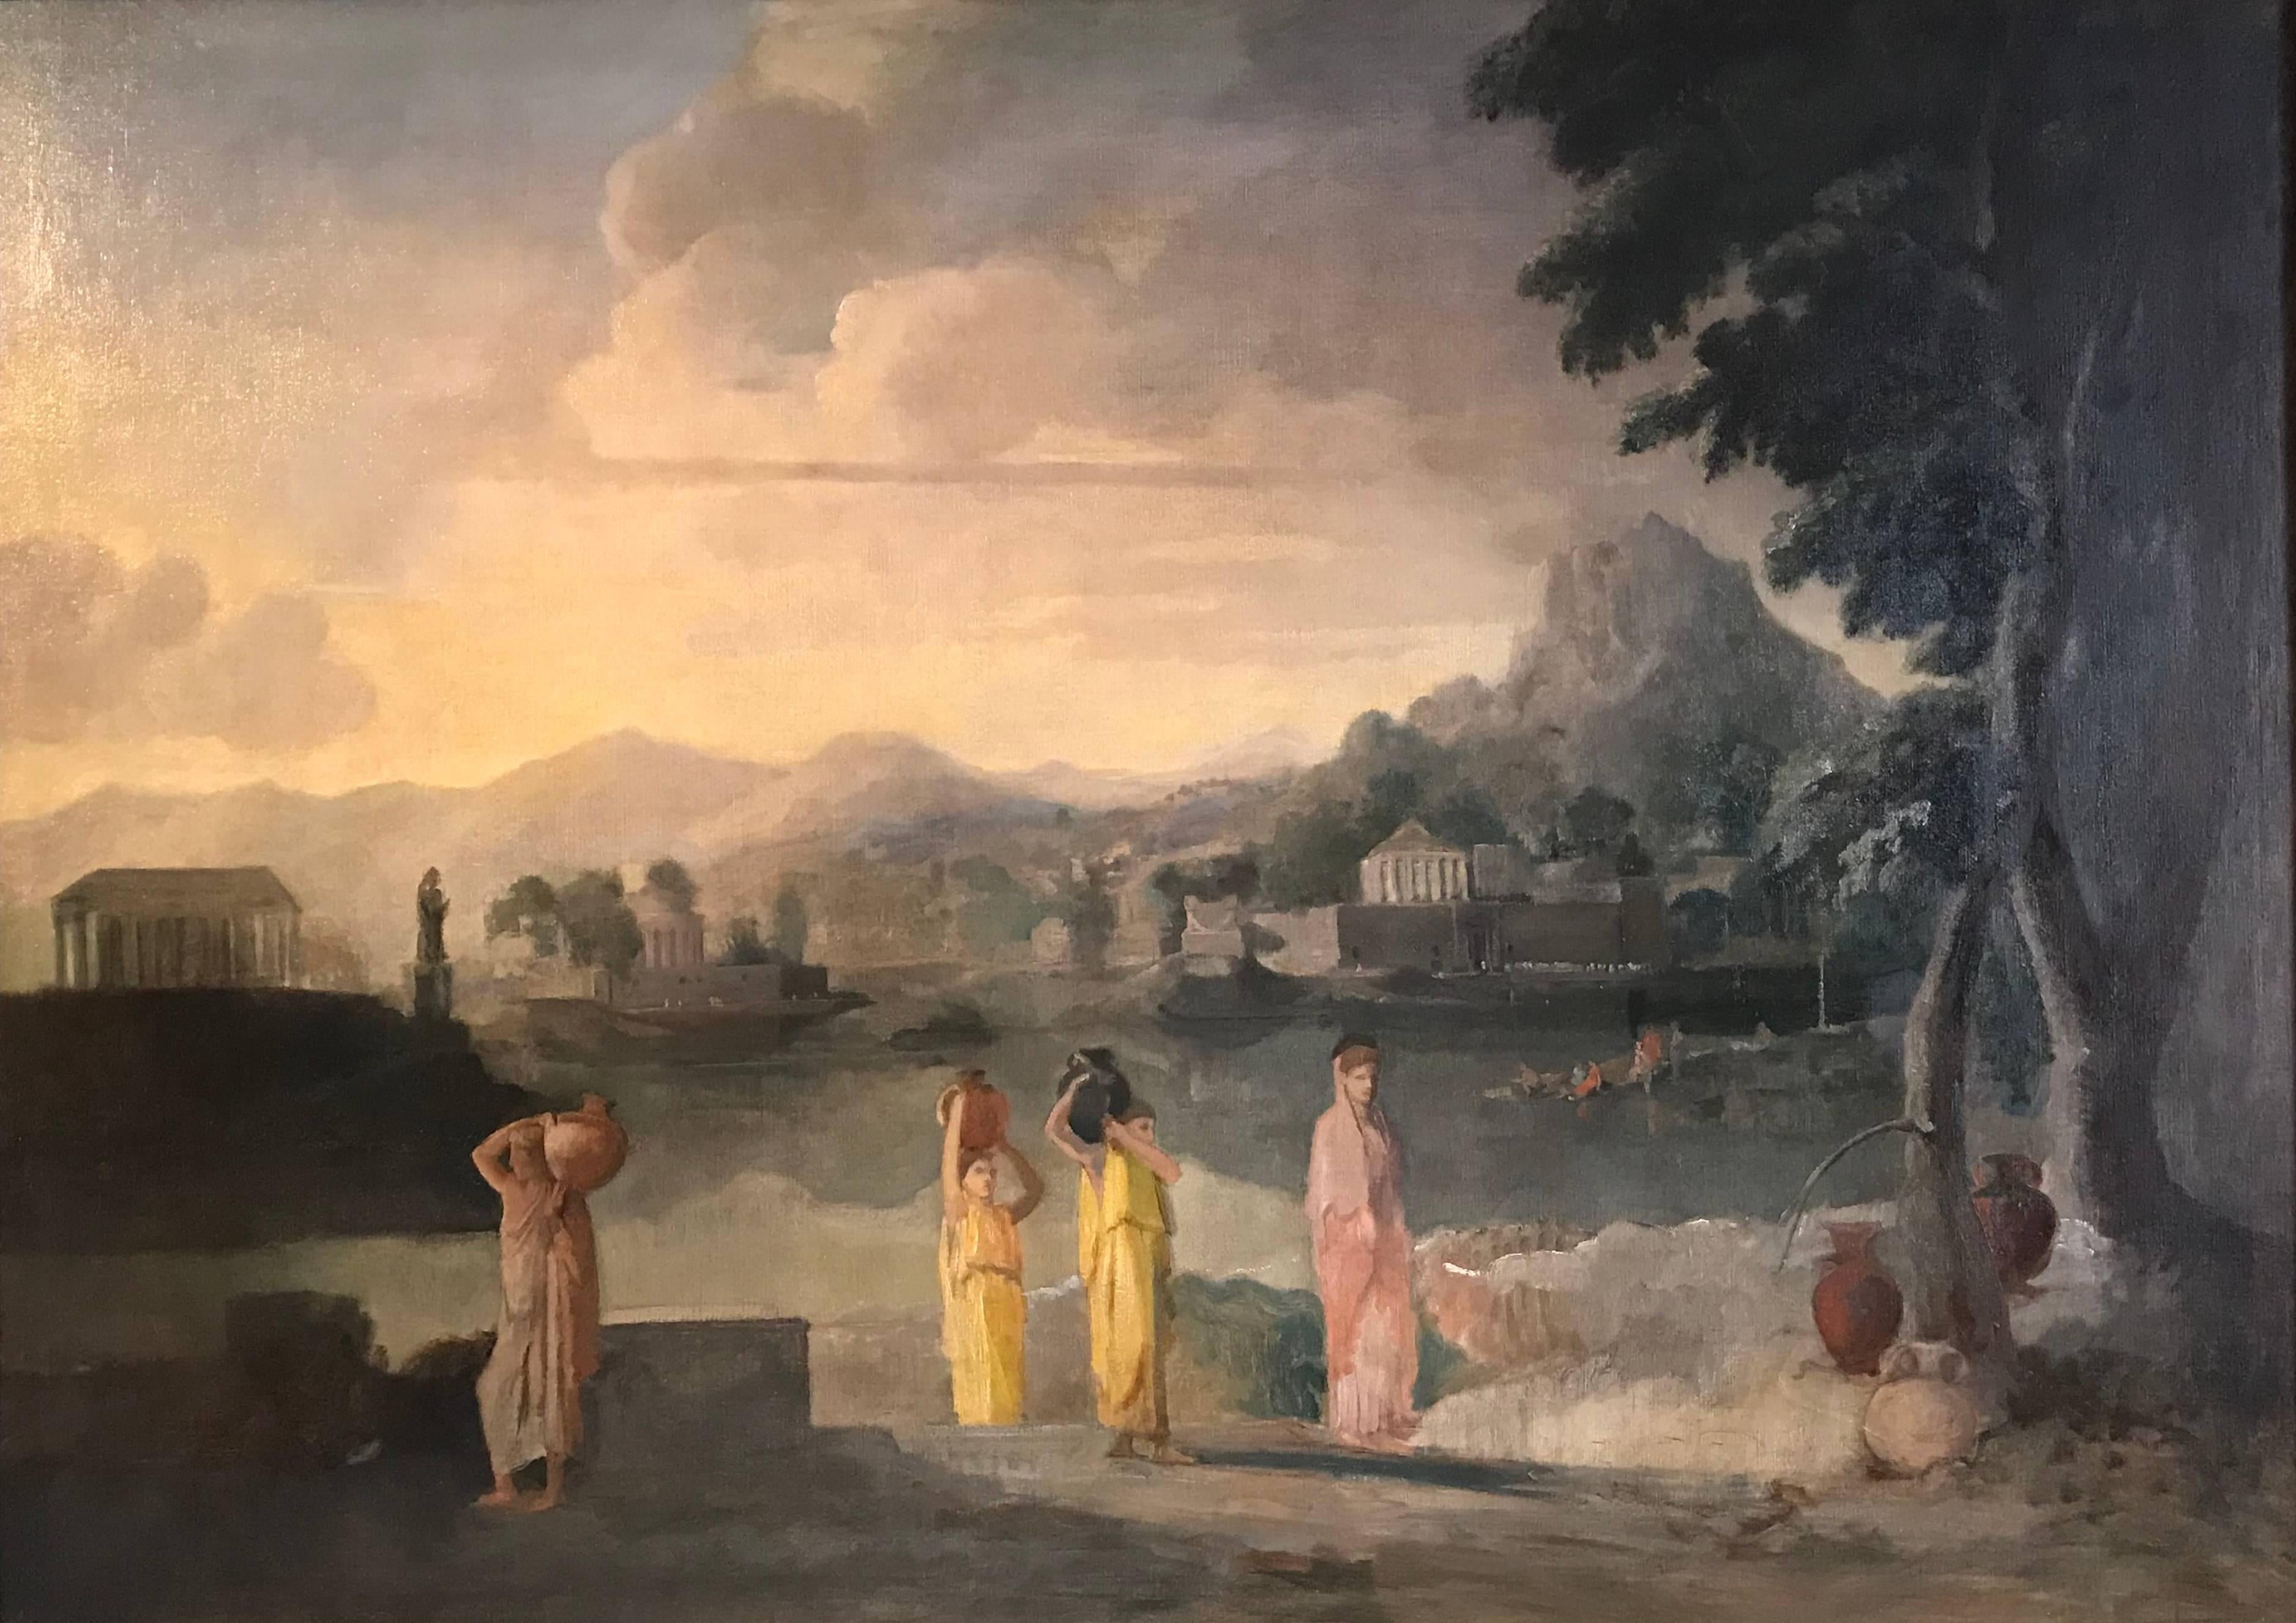 Unknown Figurative Painting - Enormous Neo-Classical Painting - Figures in Italianate Arcadian Landscape